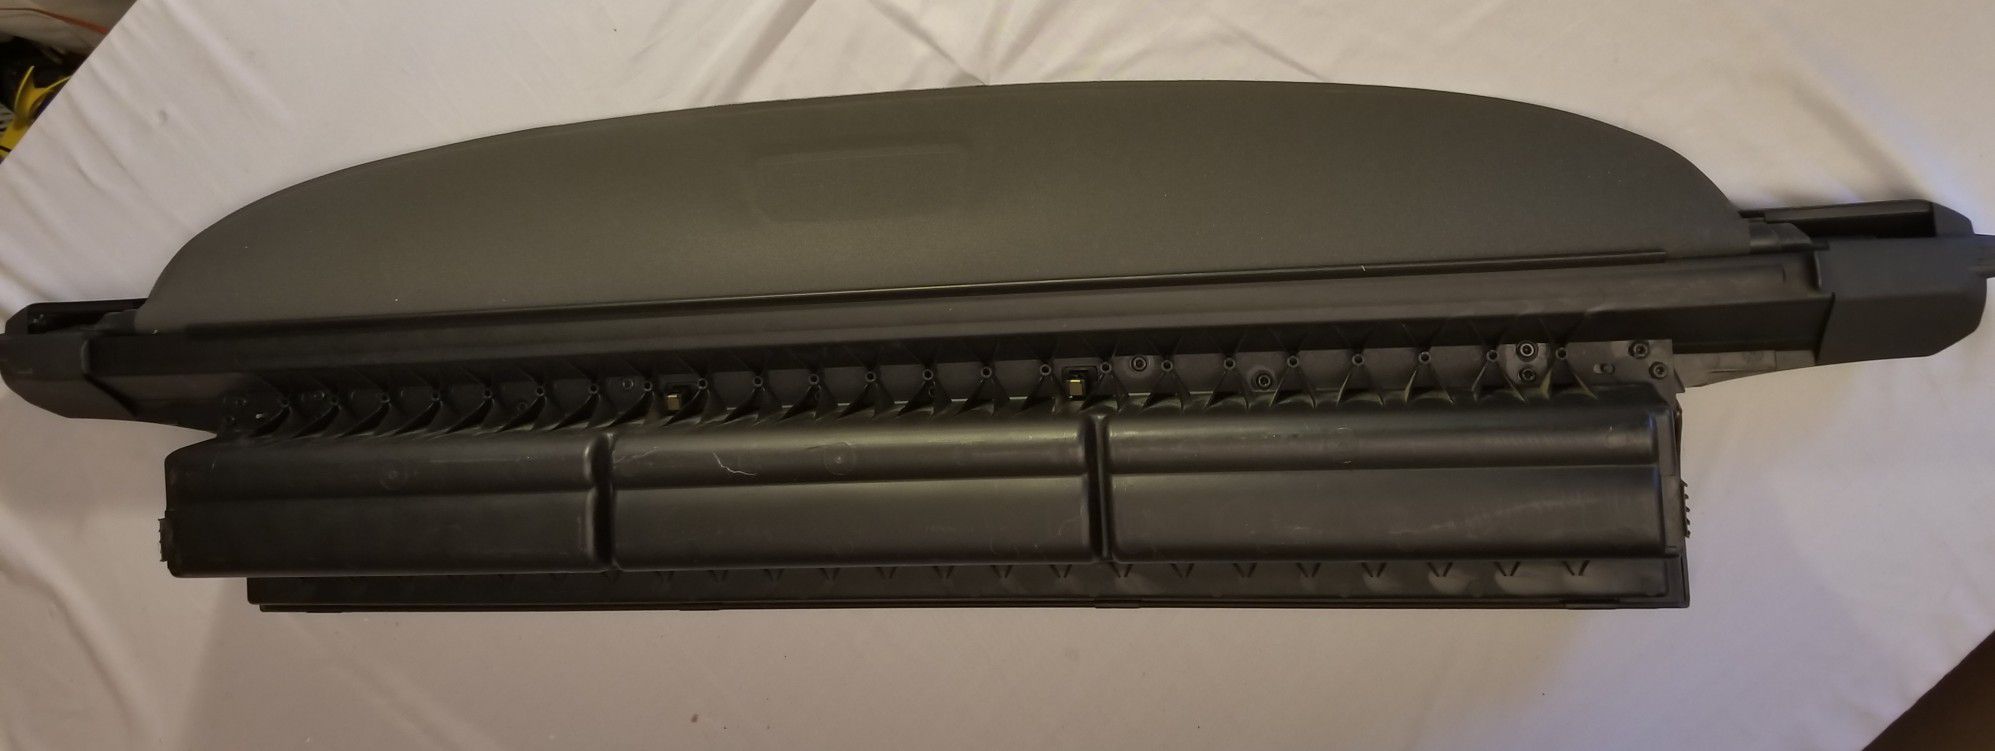 Volvo Luggage Cover Compartment Cover OEM Part 39898414 black.